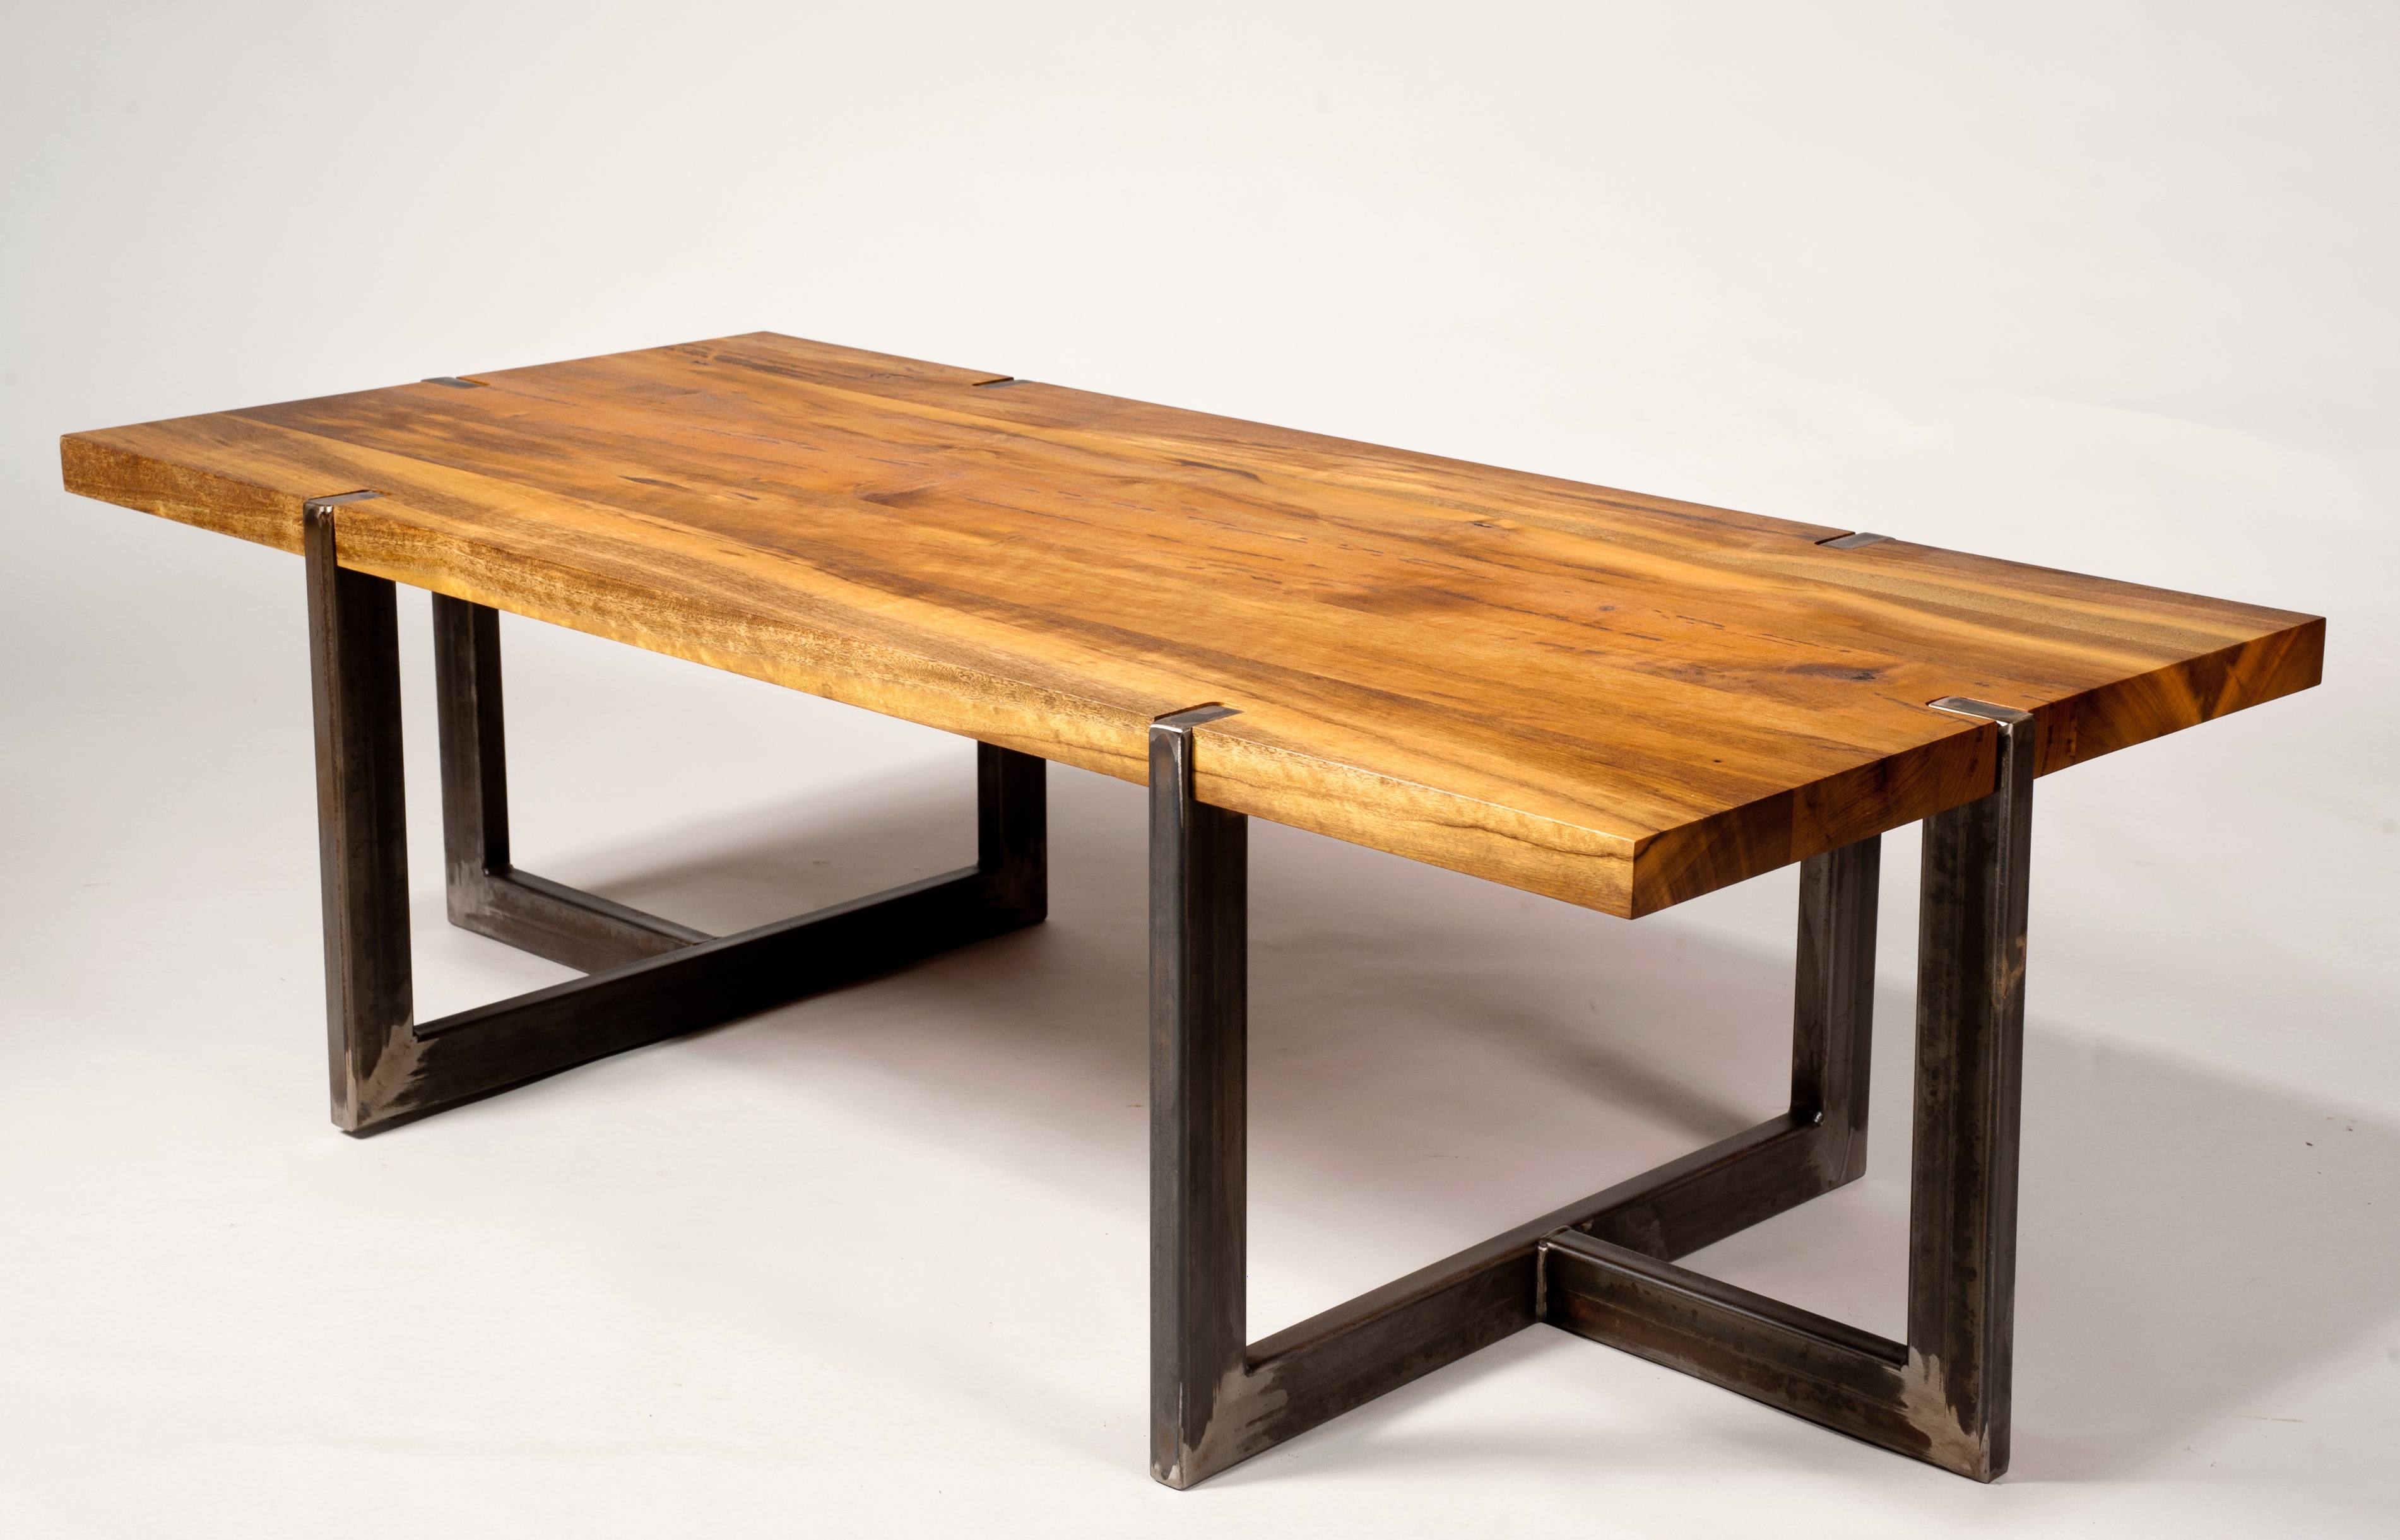 wood table designs photo - 2